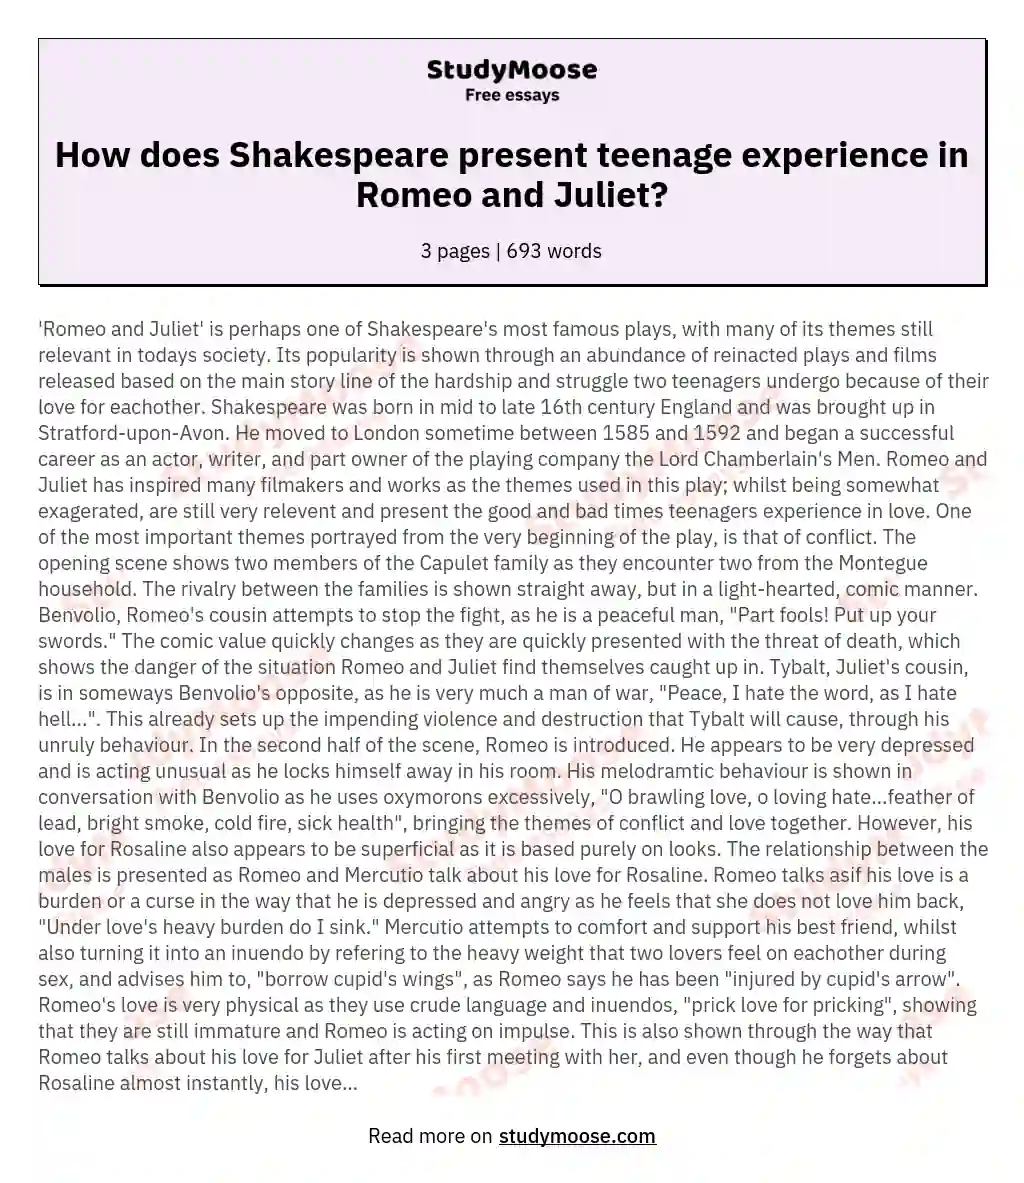 How does Shakespeare present teenage experience in Romeo and Juliet? essay